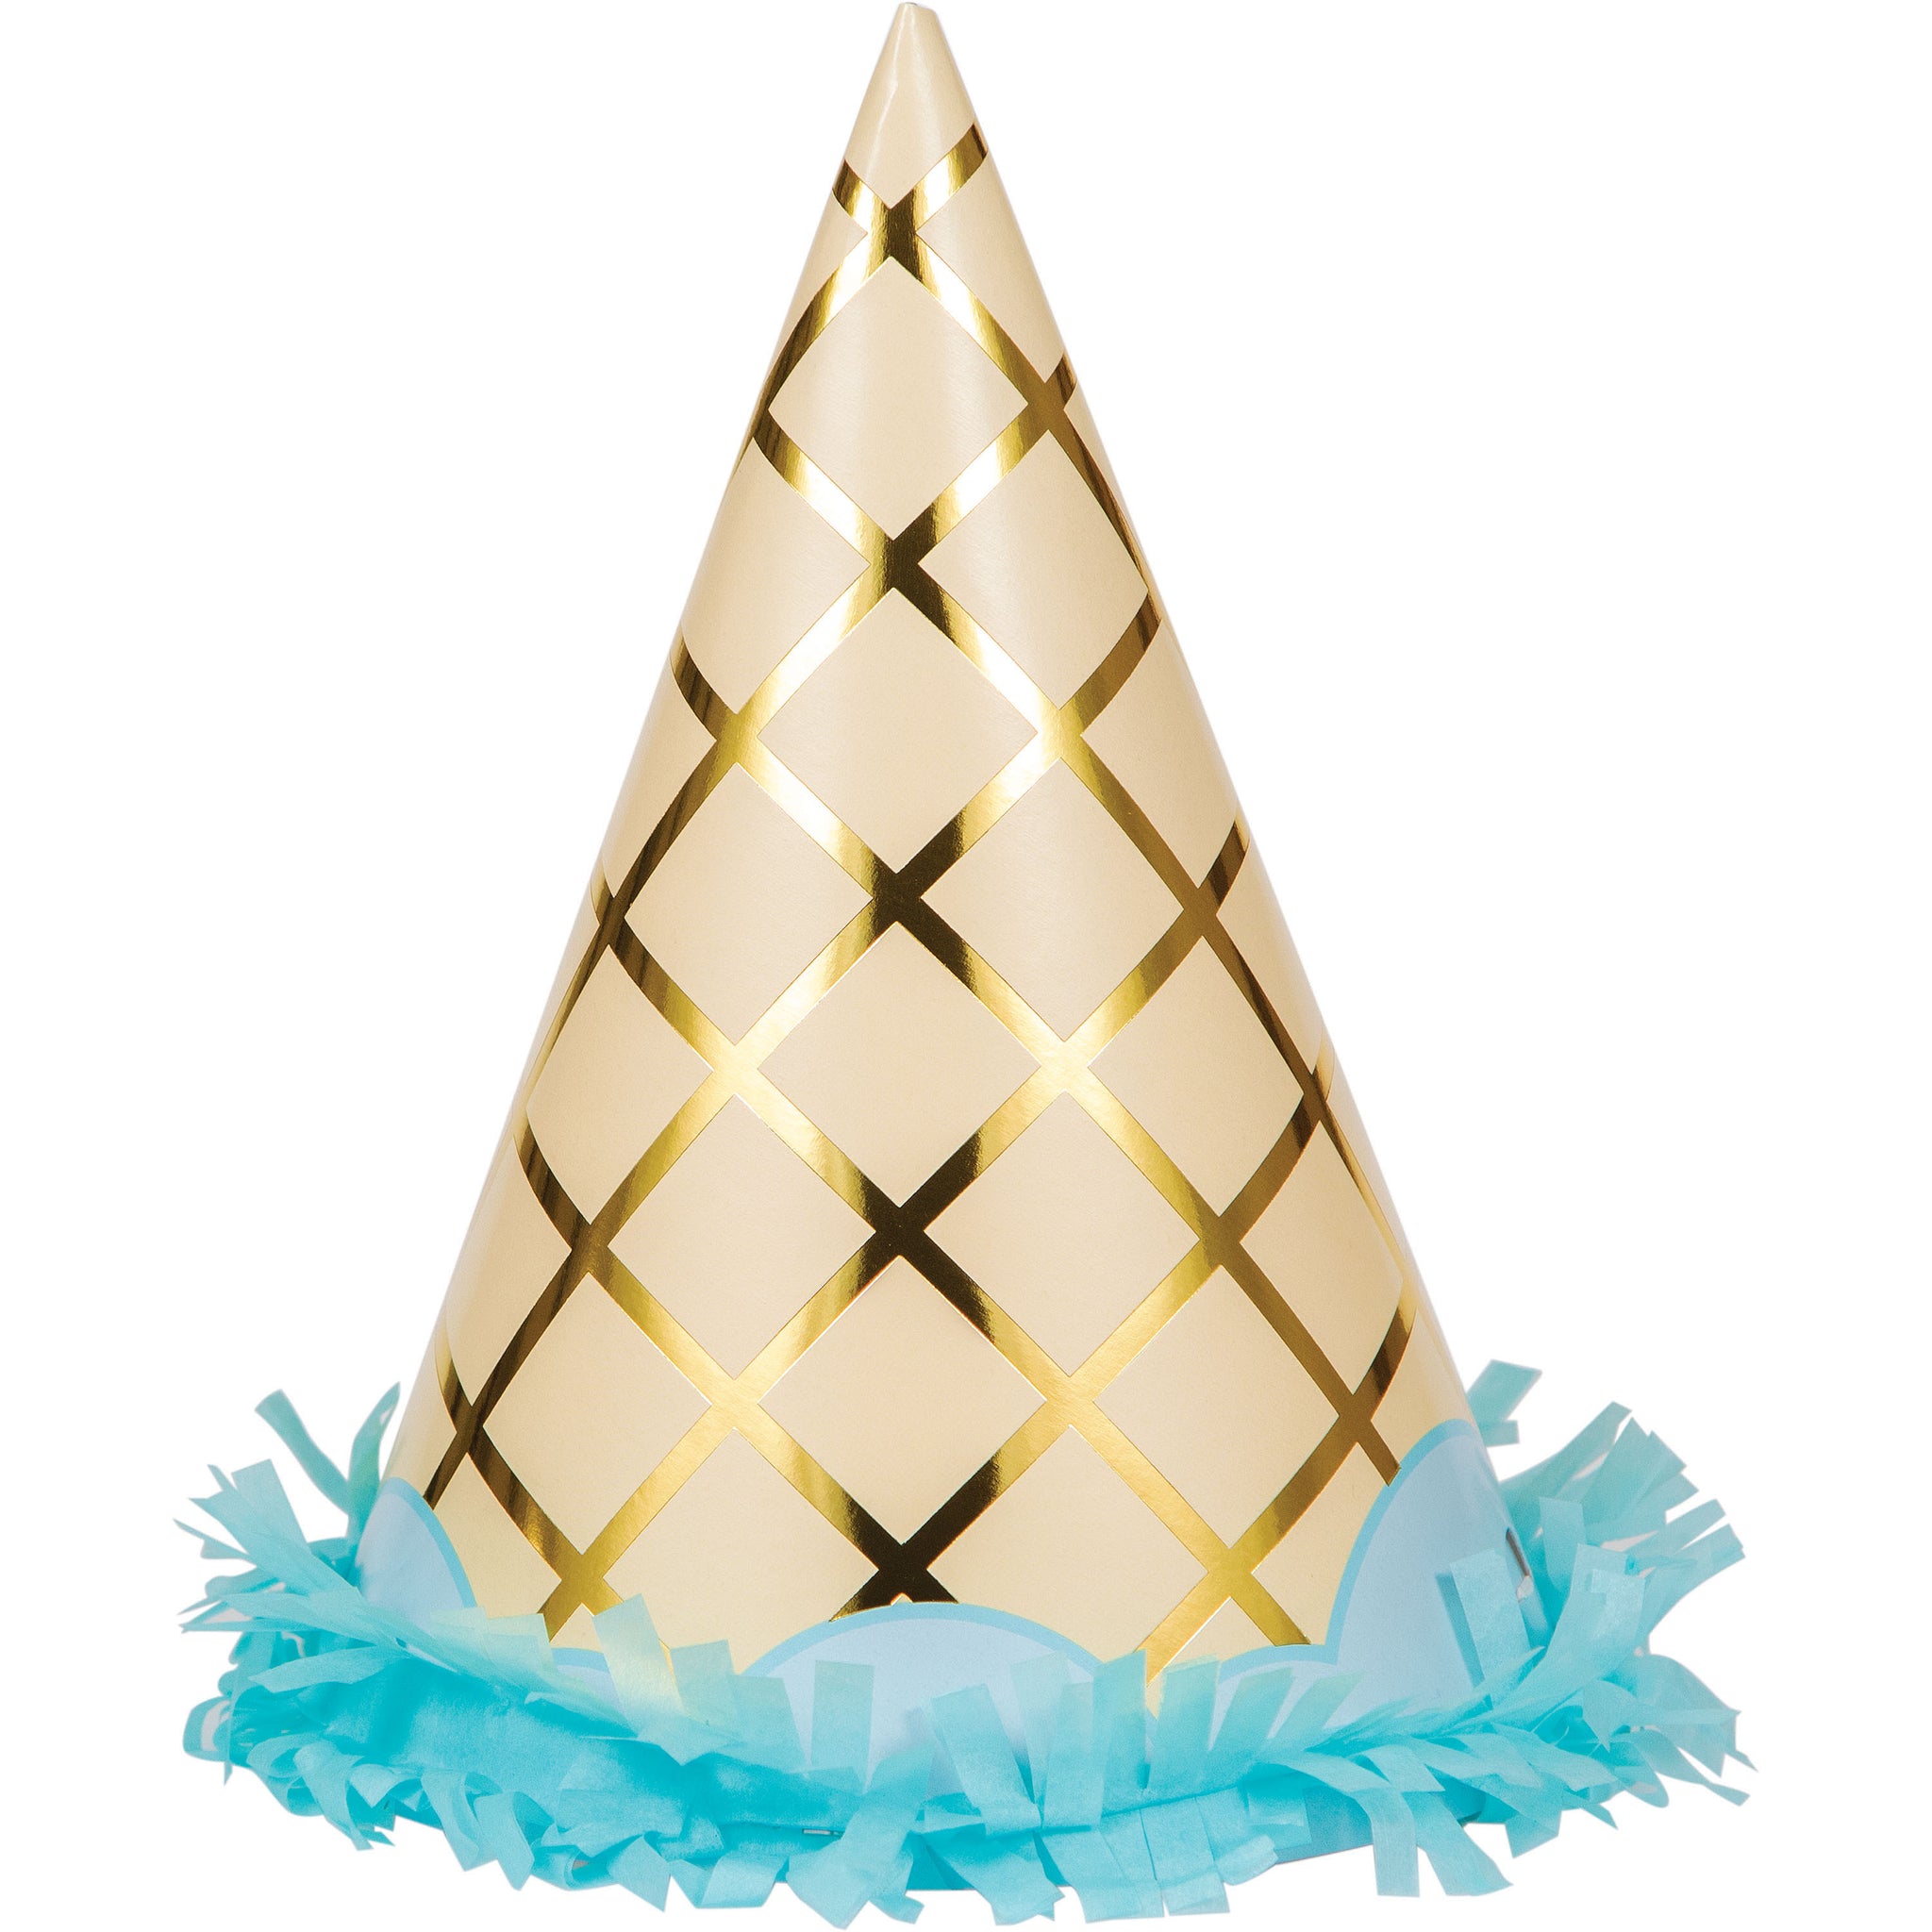 Ice Cream Assorted Party Hats with Fringe